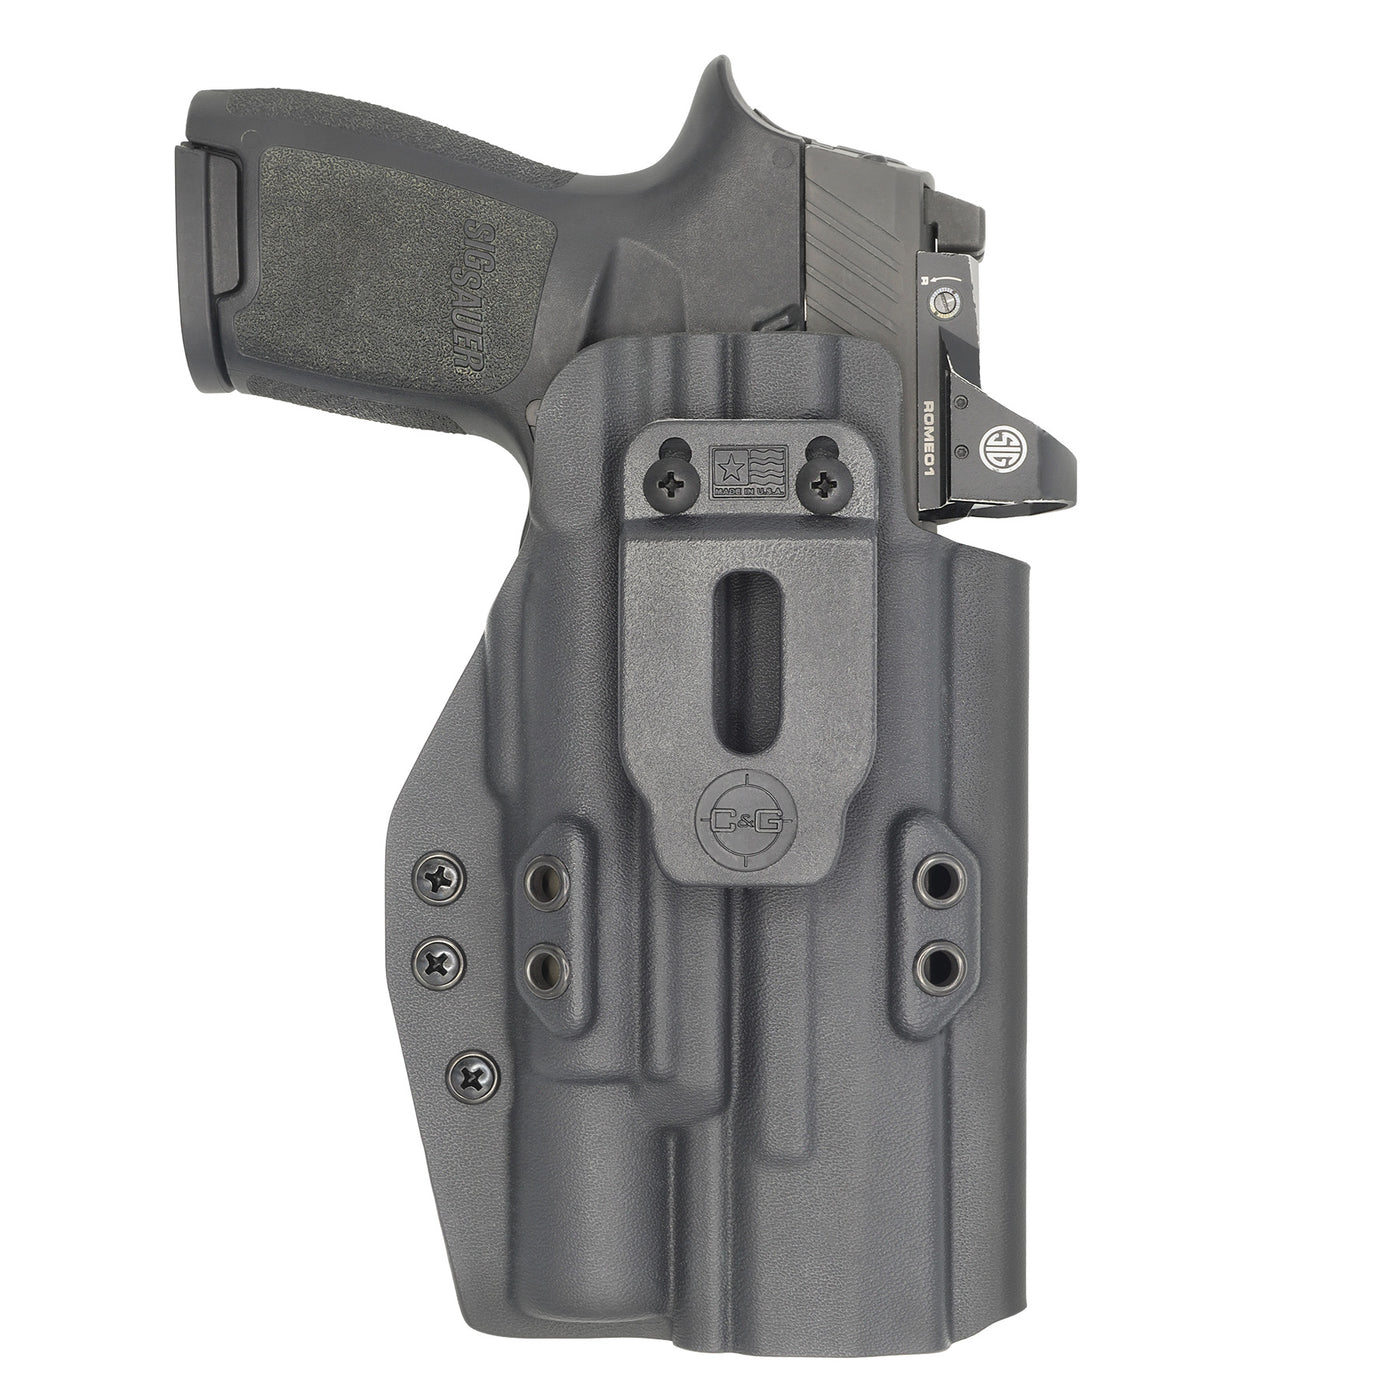 C&G Holsters custom IWB Tactical IWI Masada Surefire X300 in holstered position